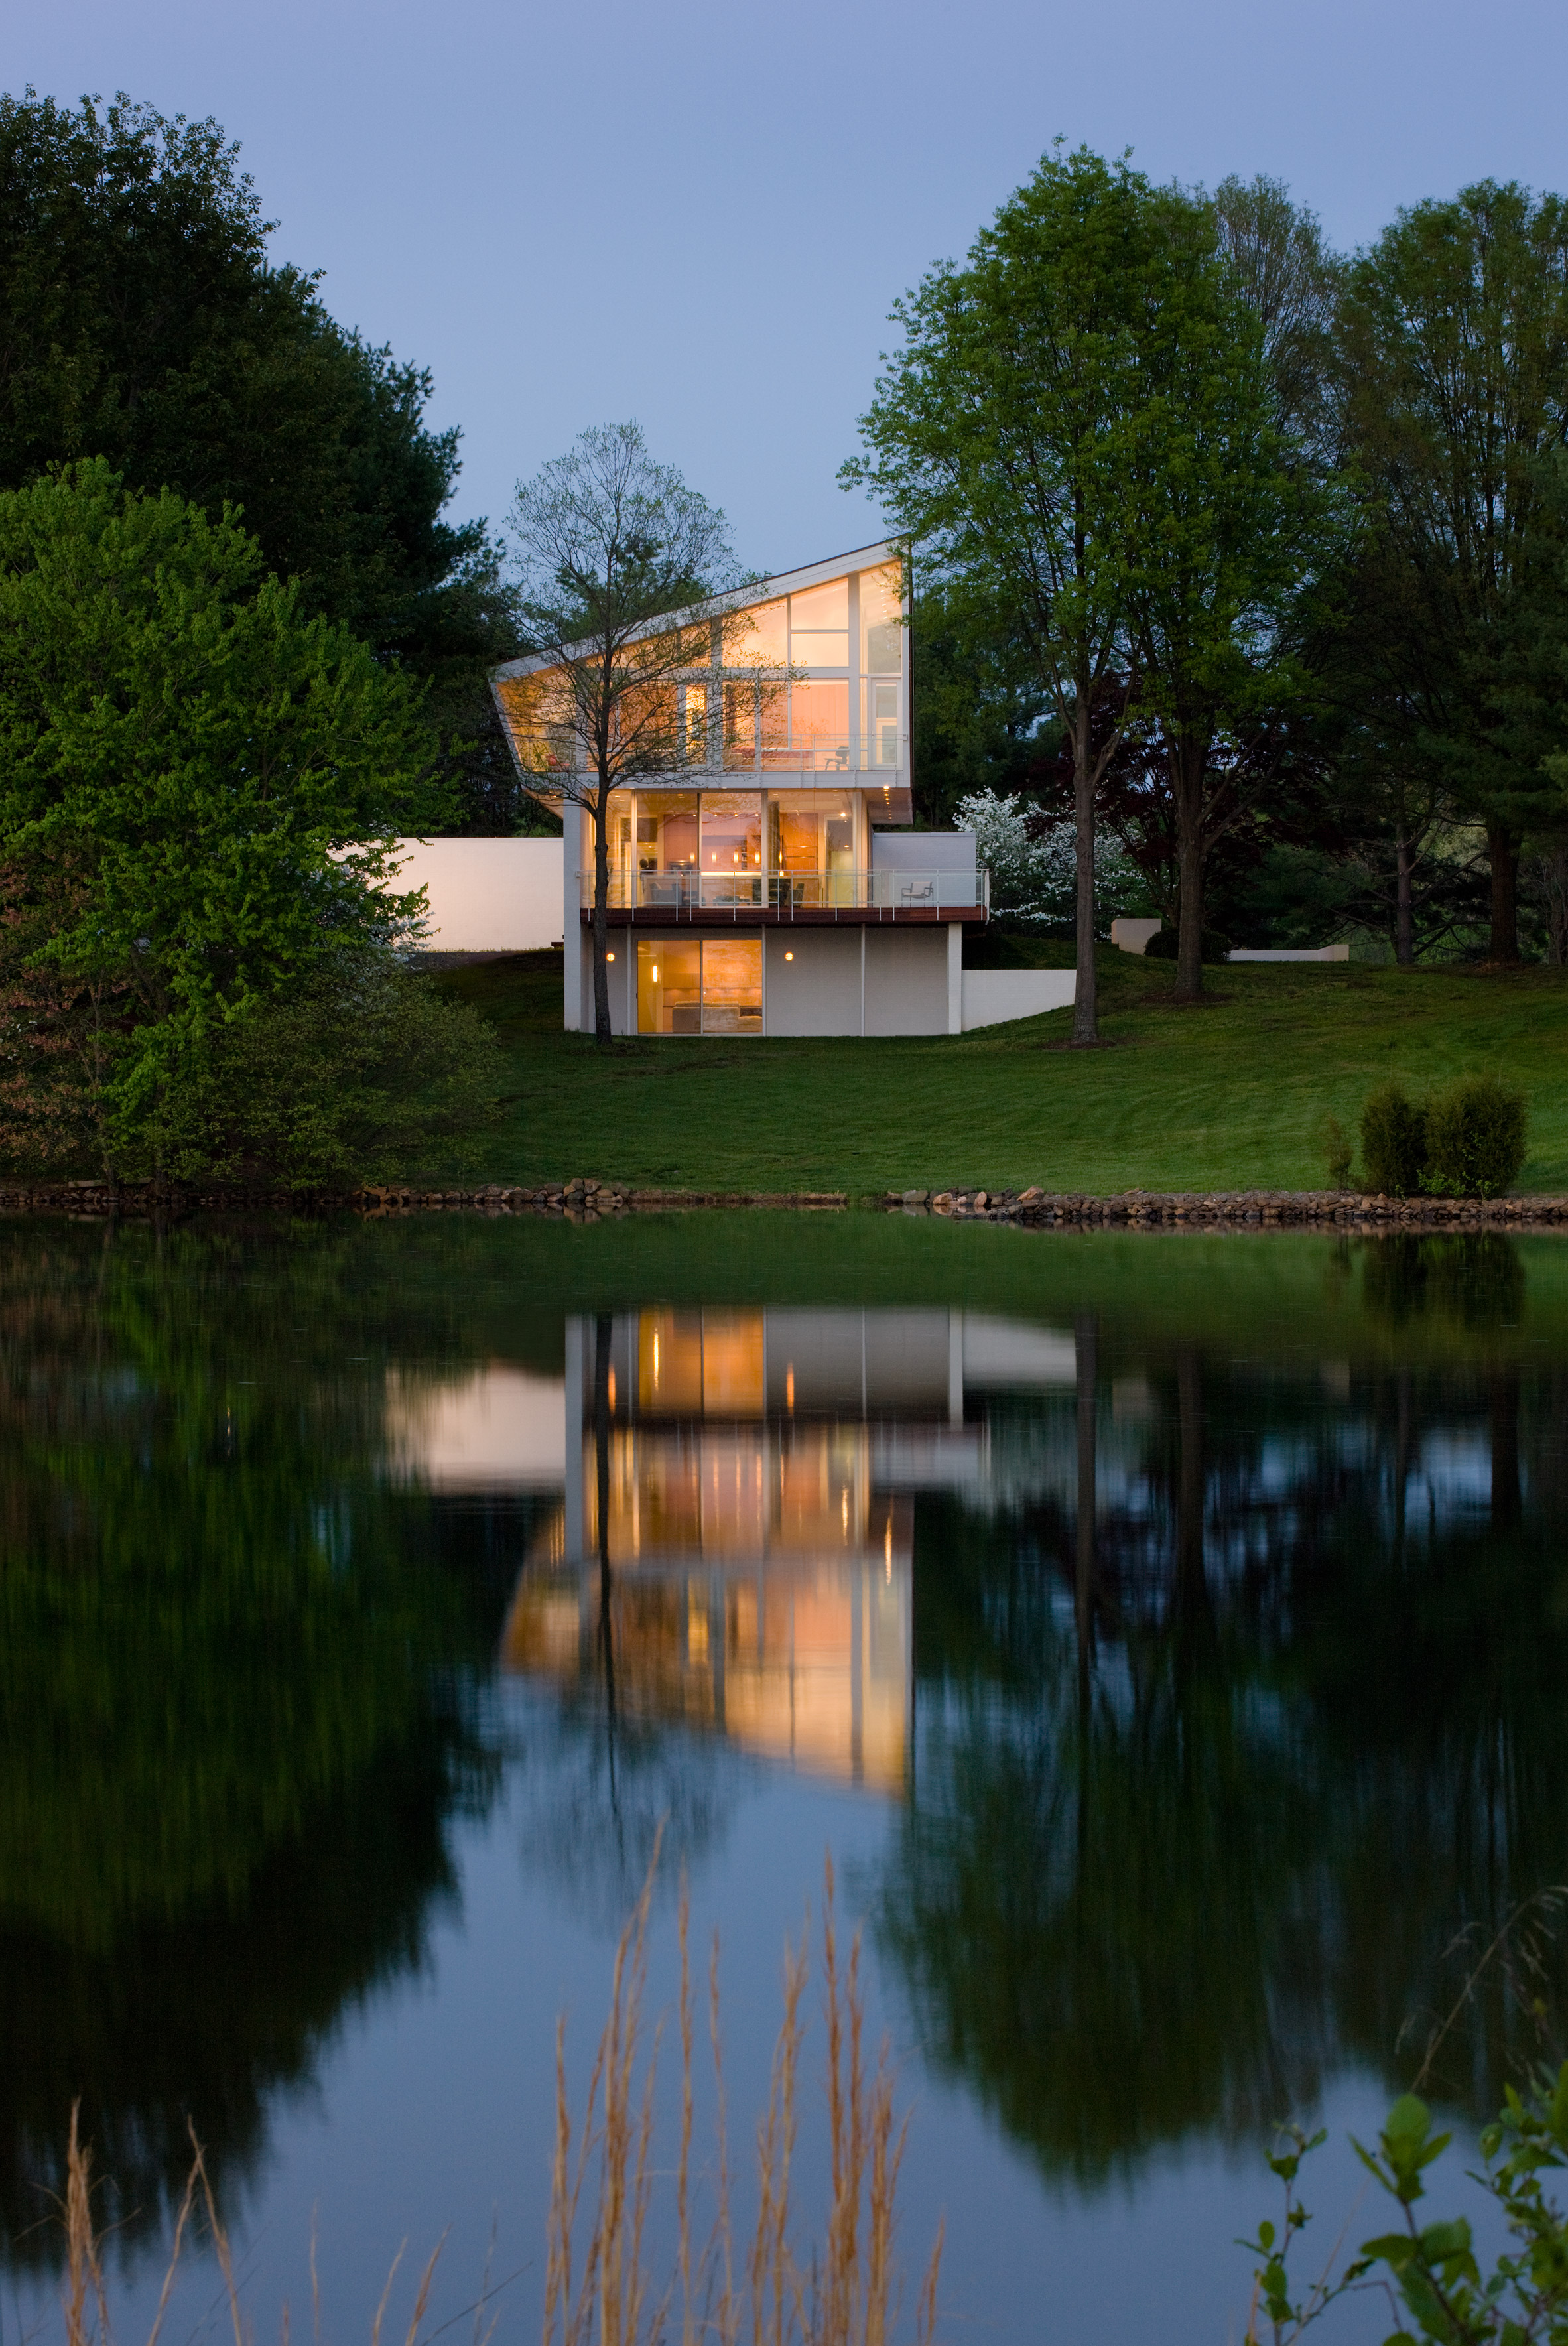 Buisson Residence by Robert Gurney Architect. Photograph is by Paul Warchol